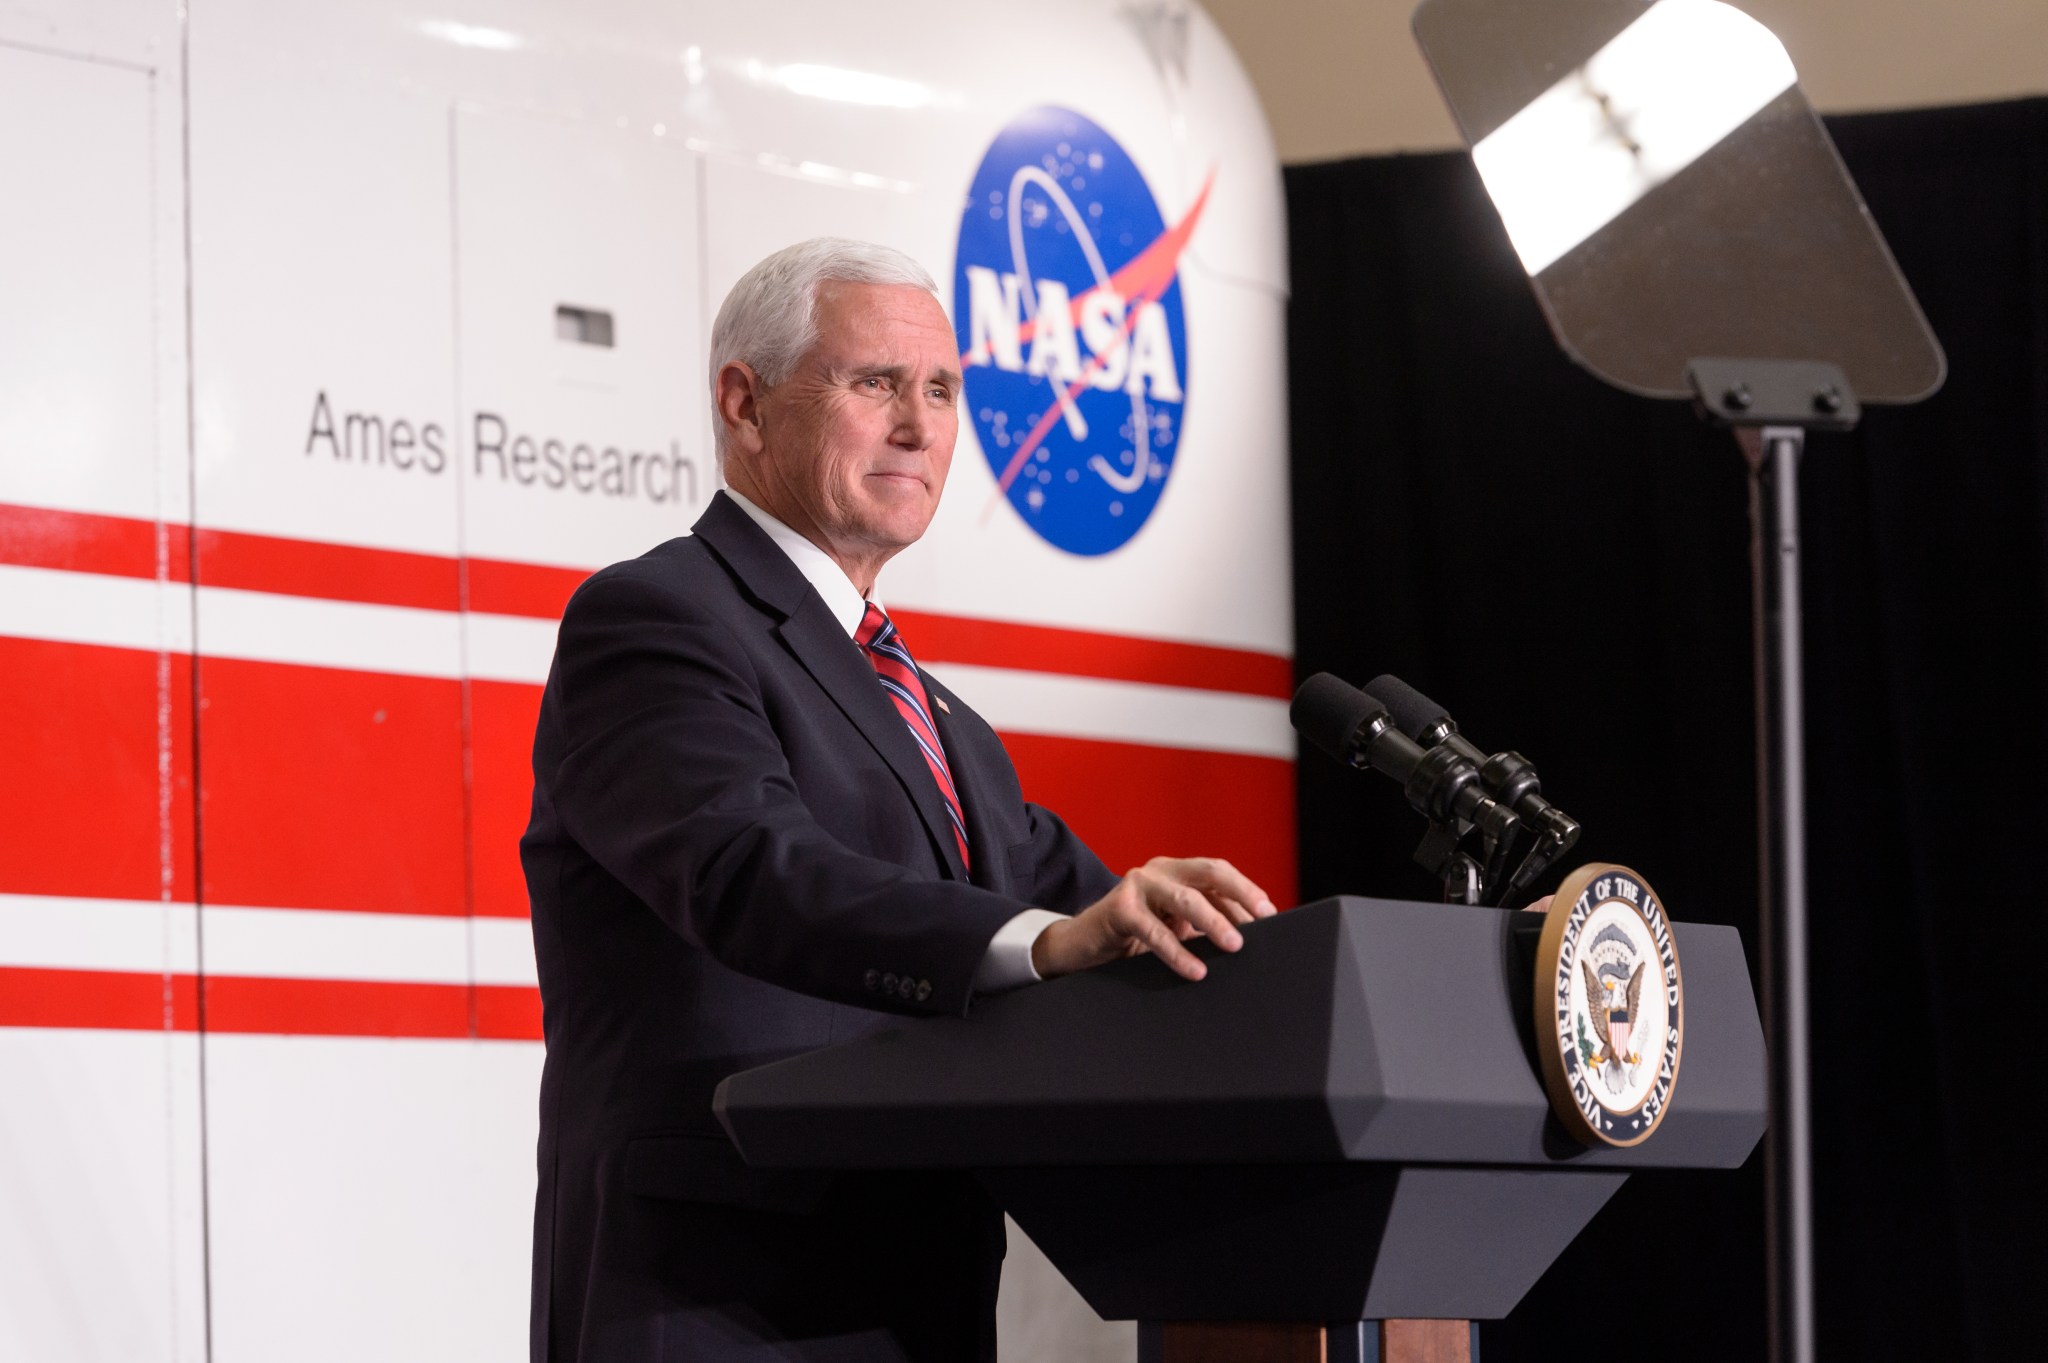 Vice President Mike Pence stands at a podium in front of a white vehicle with red stripe and a NASA logo